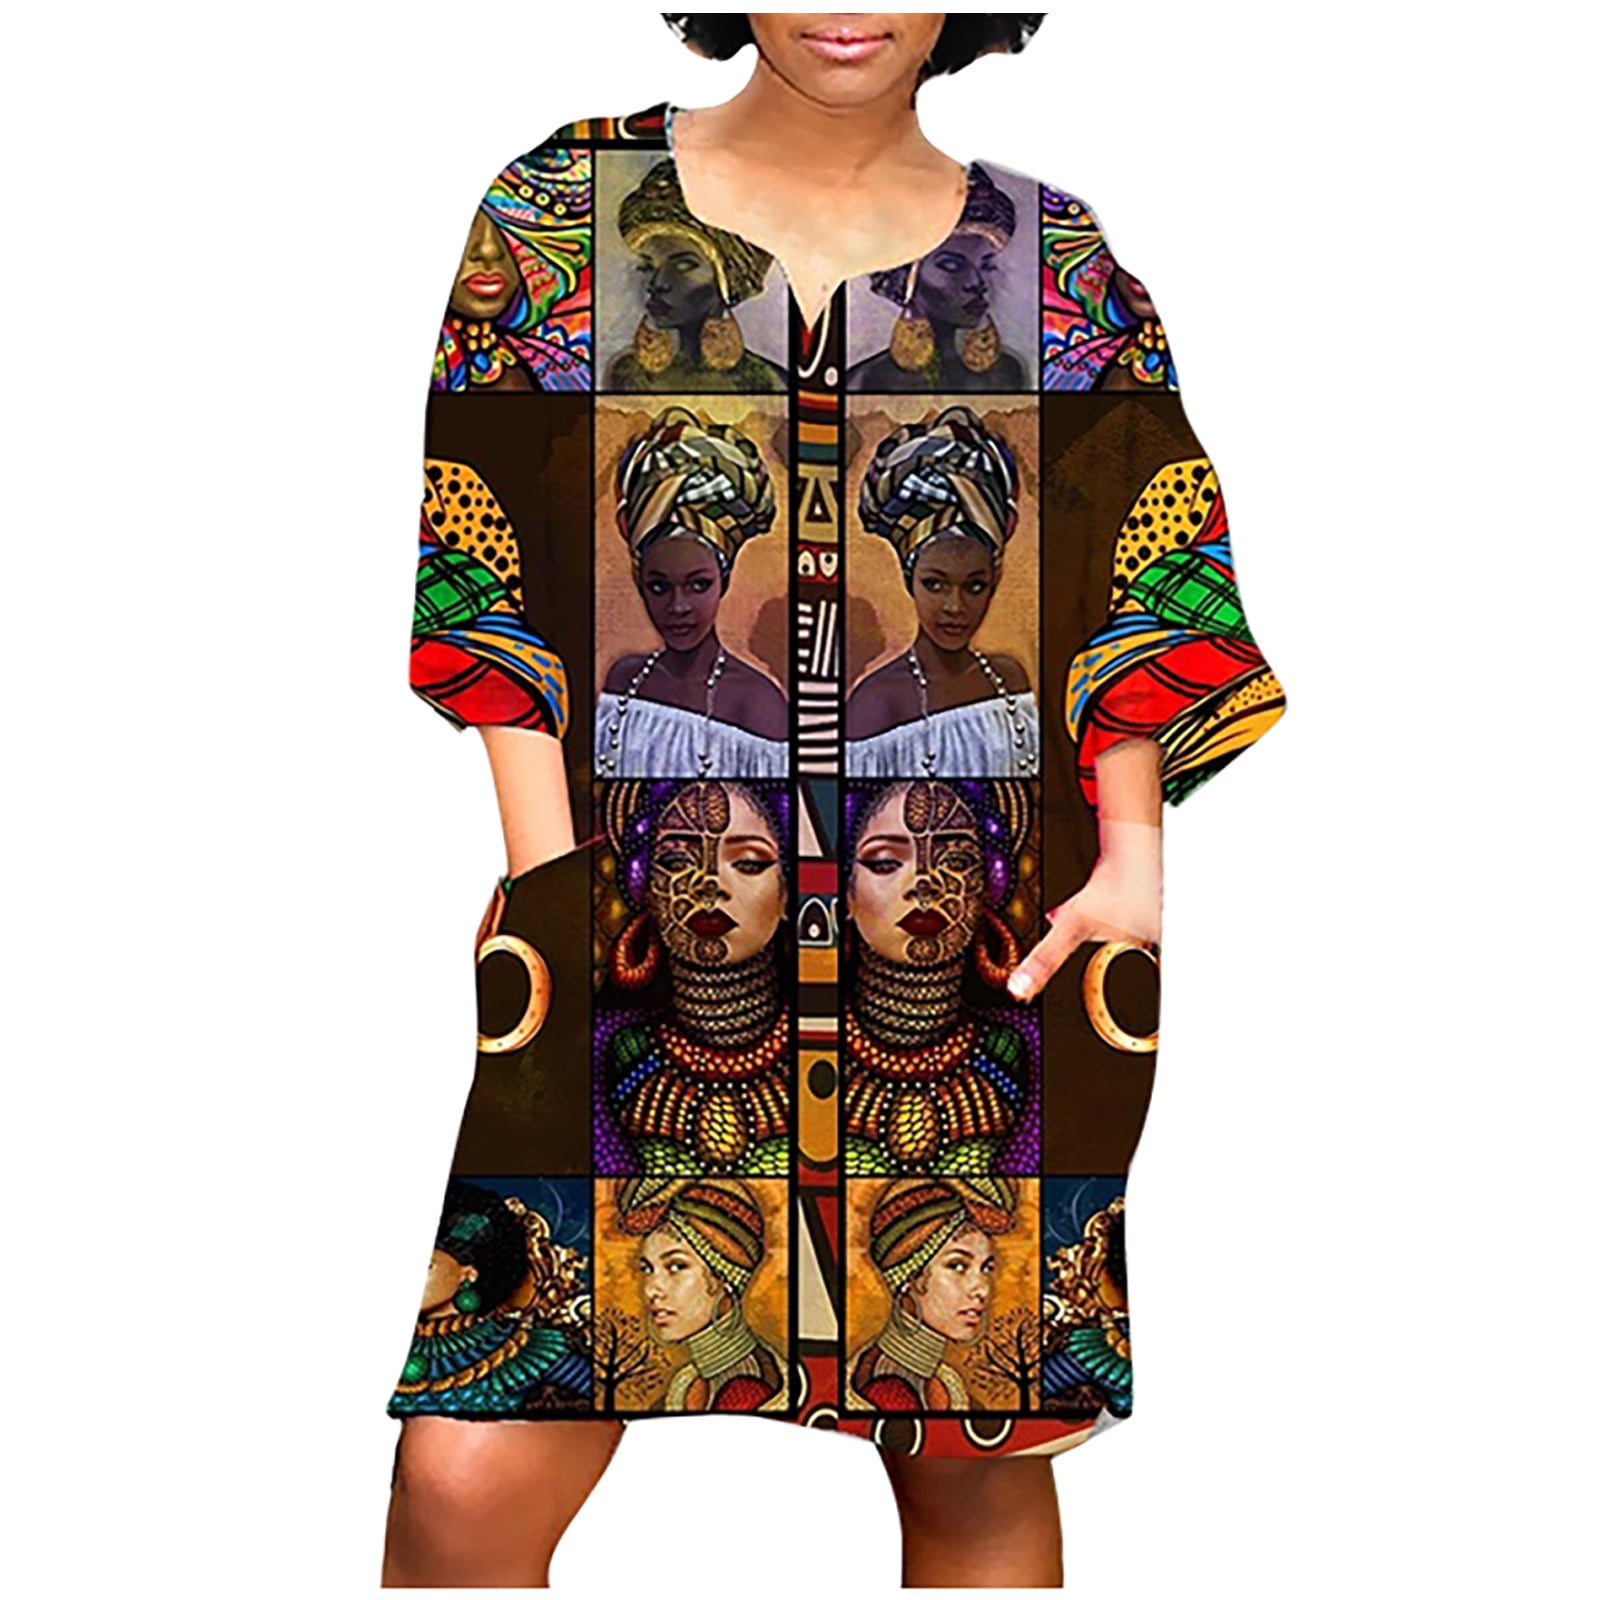 Women's African Vintage Print Dress with Pockets Half Sleeve V Neck Knee Length Gowns Casual Mini Dress Plus Size S-5XL 